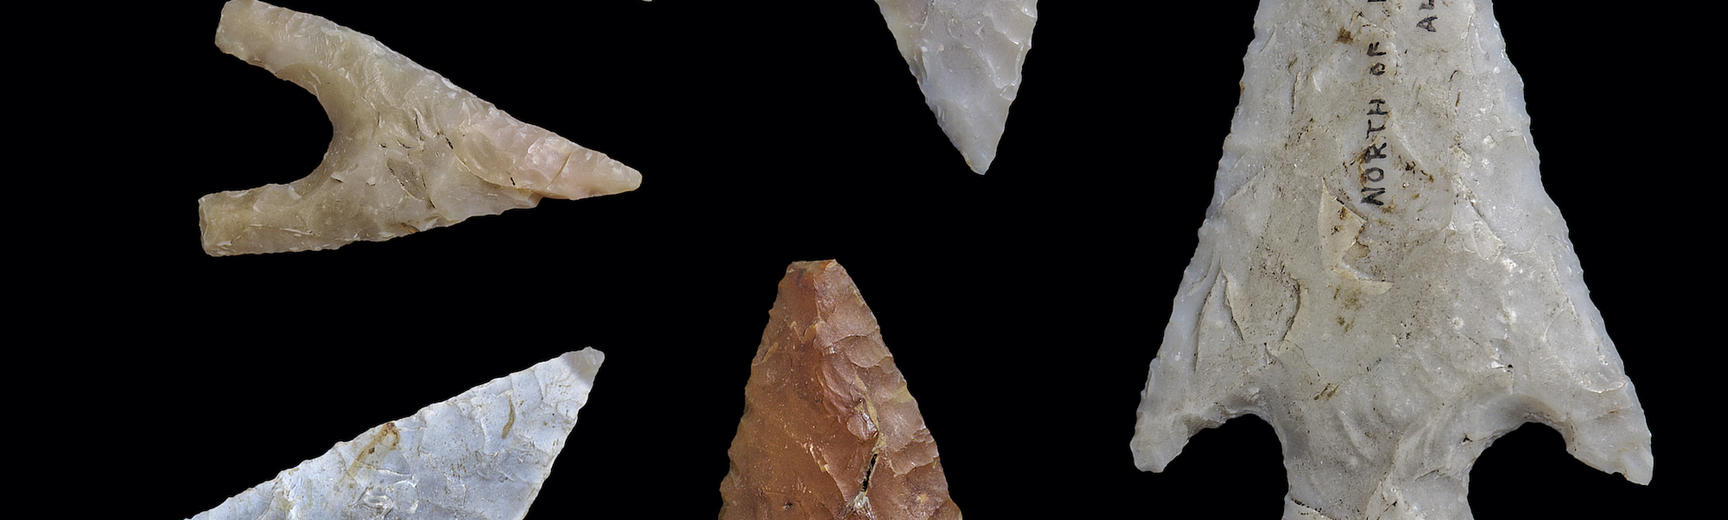 Six arrowheads in range of shapes from a leaf to a triangular point with a central projection at the base (tang) with smaller points (barbs) on either side. 